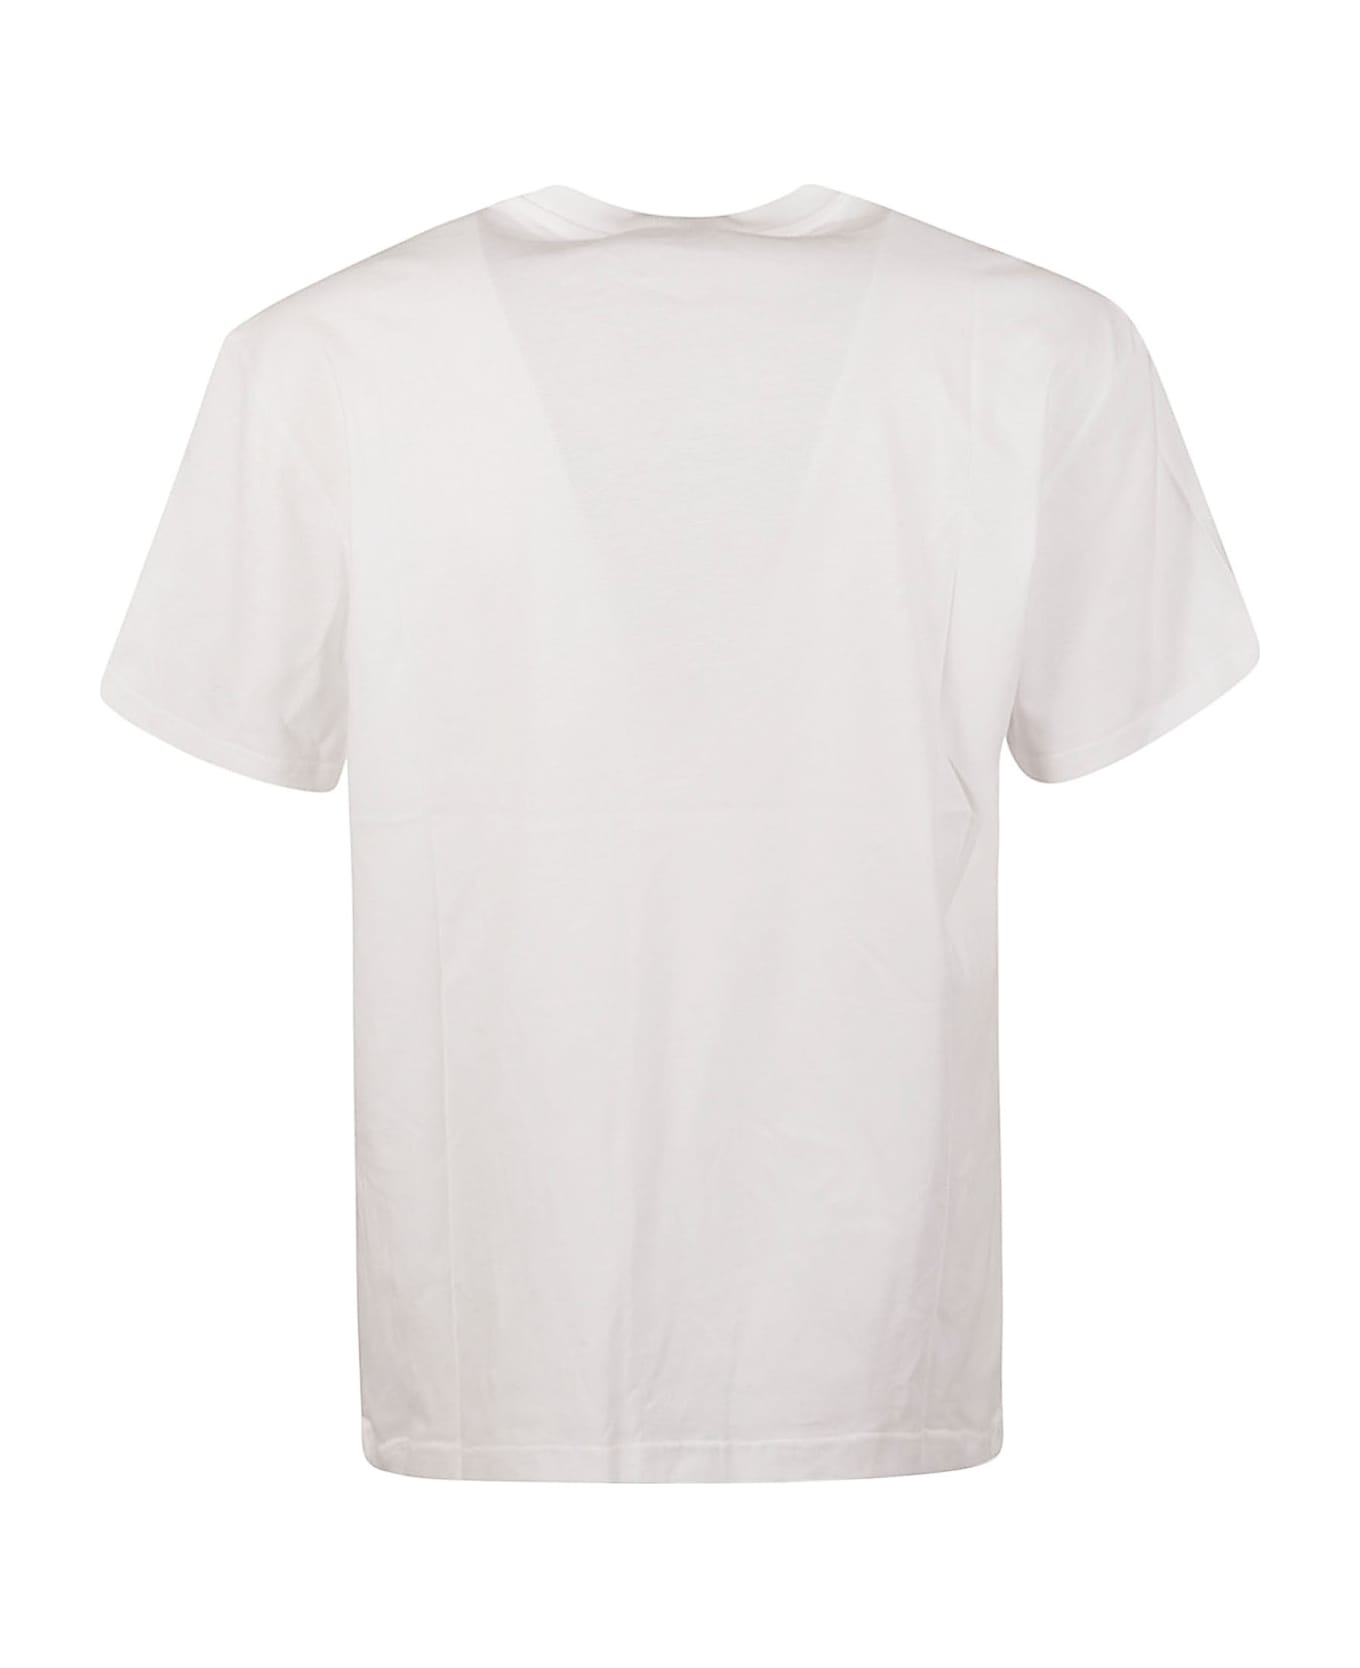 J.W. Anderson Anchor Patch T-shirt - White